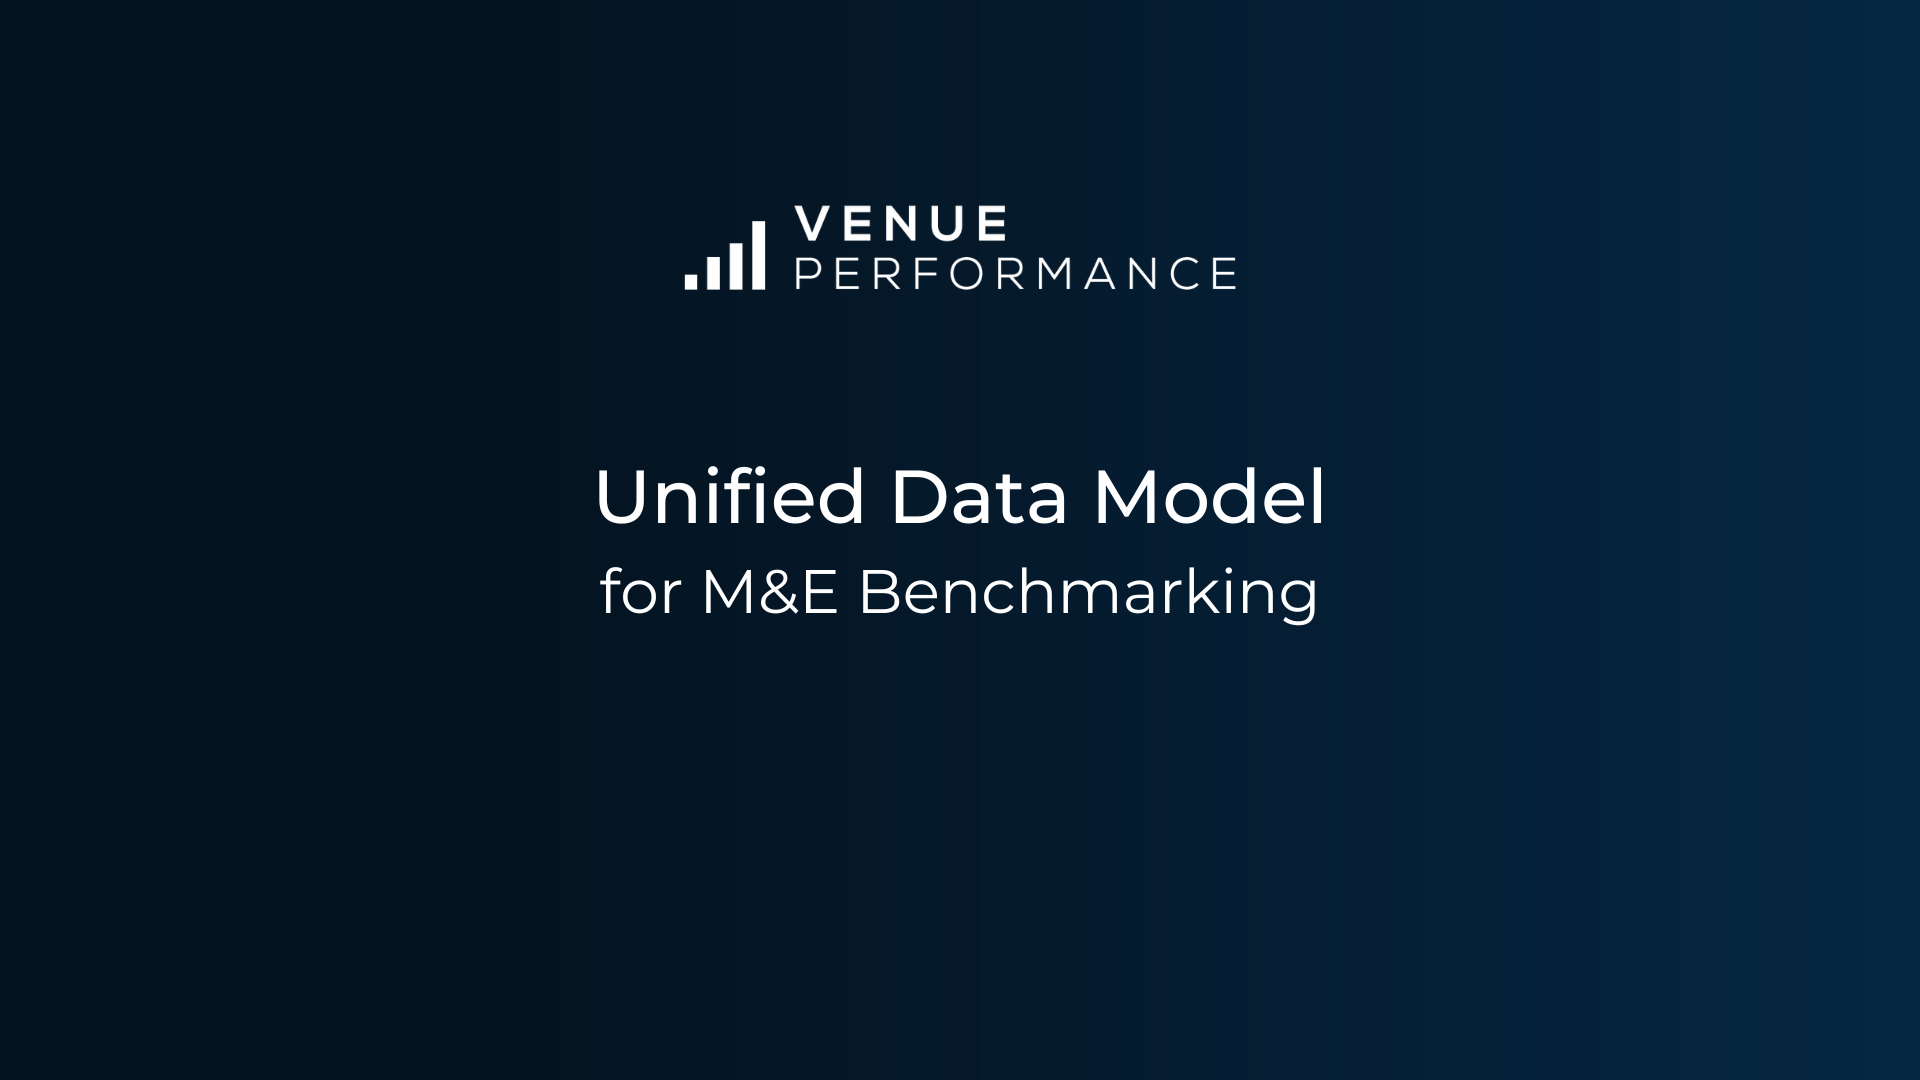 Unified Data Model for M&E Benchmarking